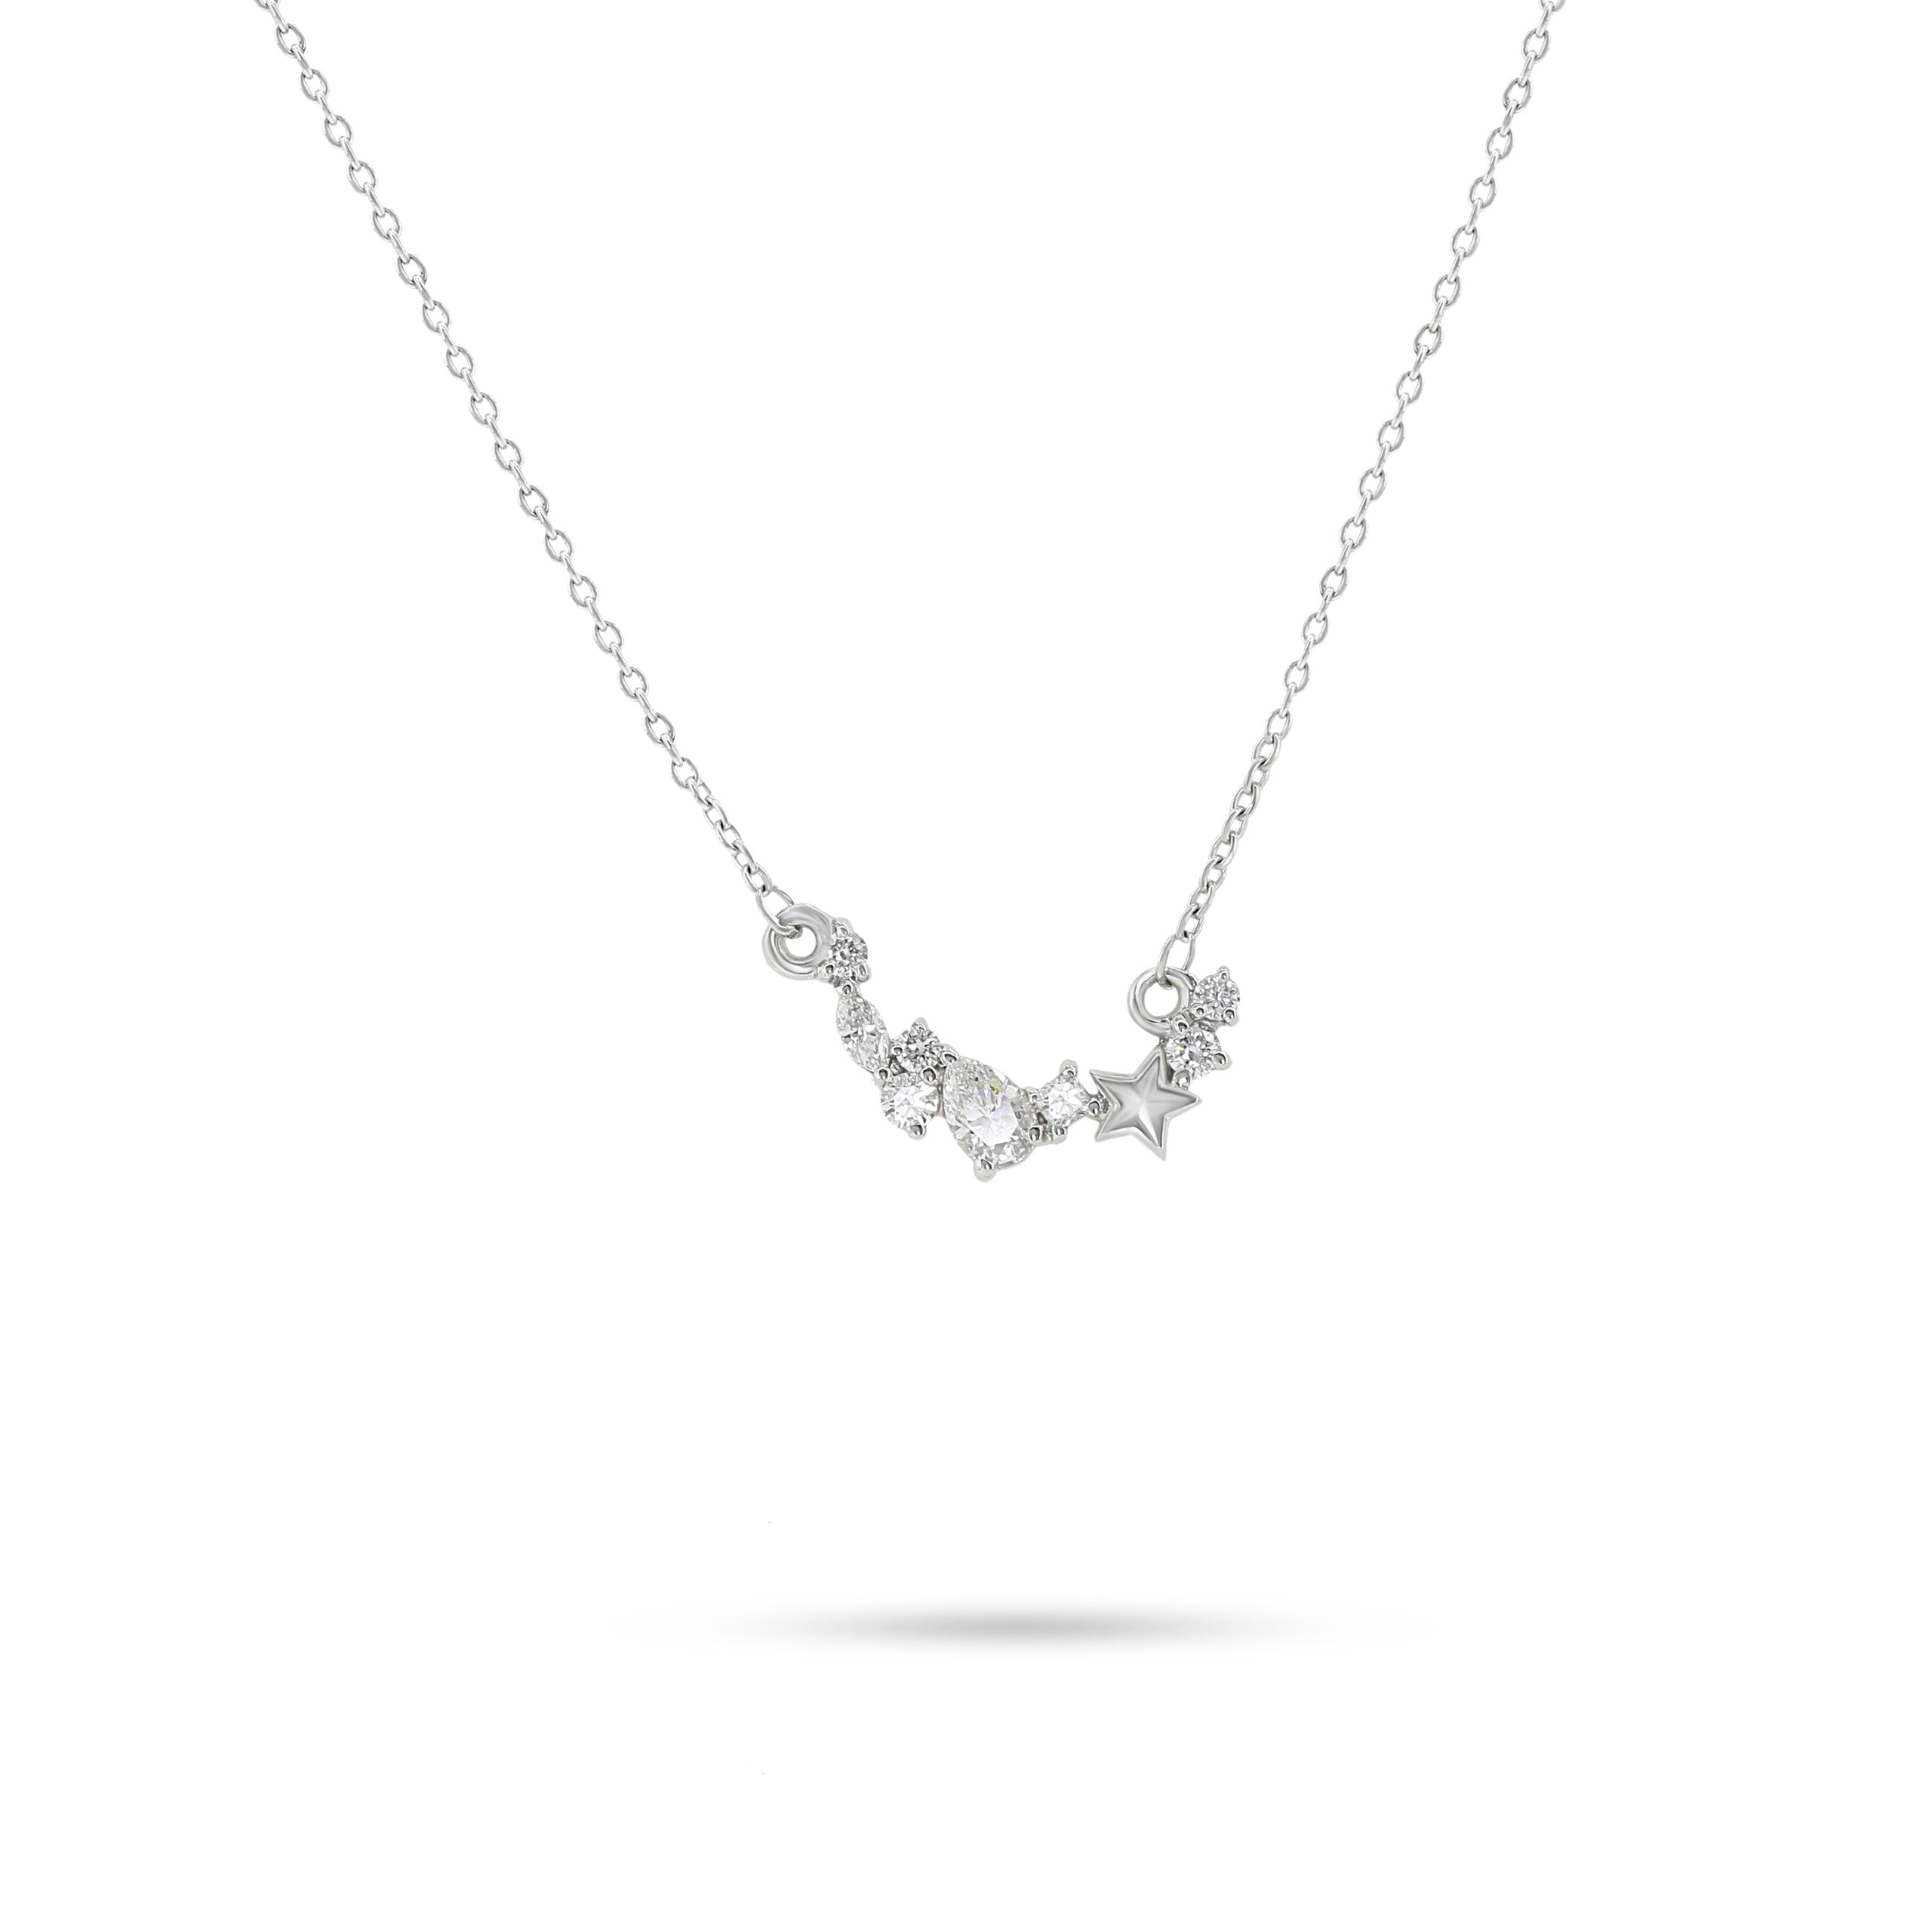 Simple Dangling Diamond Necklace in 18K White Gold - S-PN051X